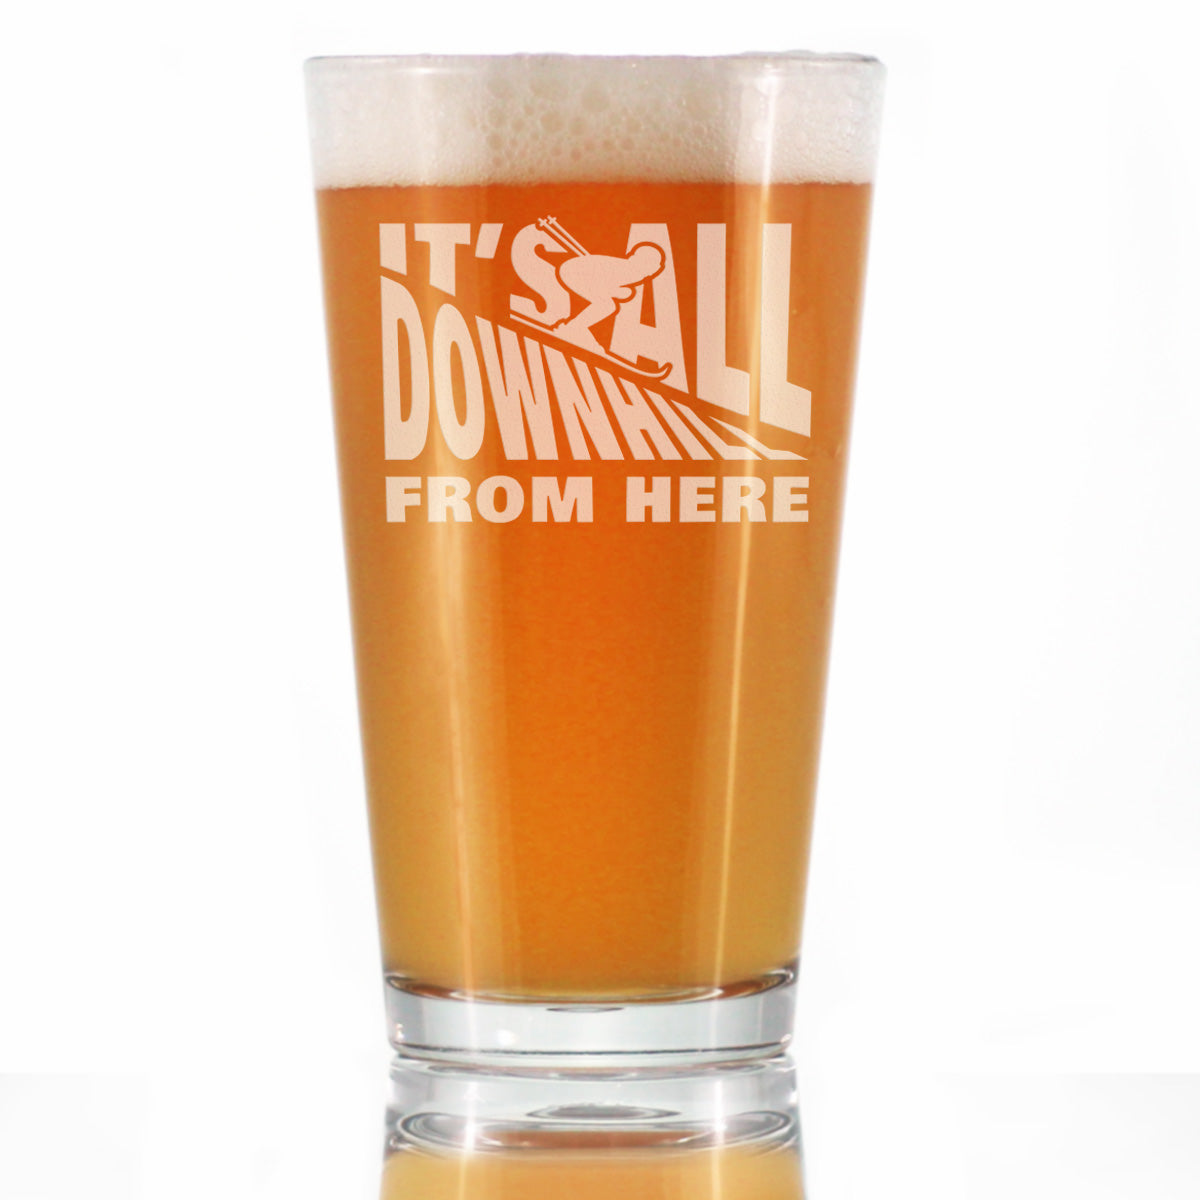 It&#39;s All Downhill From Here - Pint Glass for Beer - Unique Skiing Themed Decor and Gifts for Mountain Lovers - 16 oz Glasses